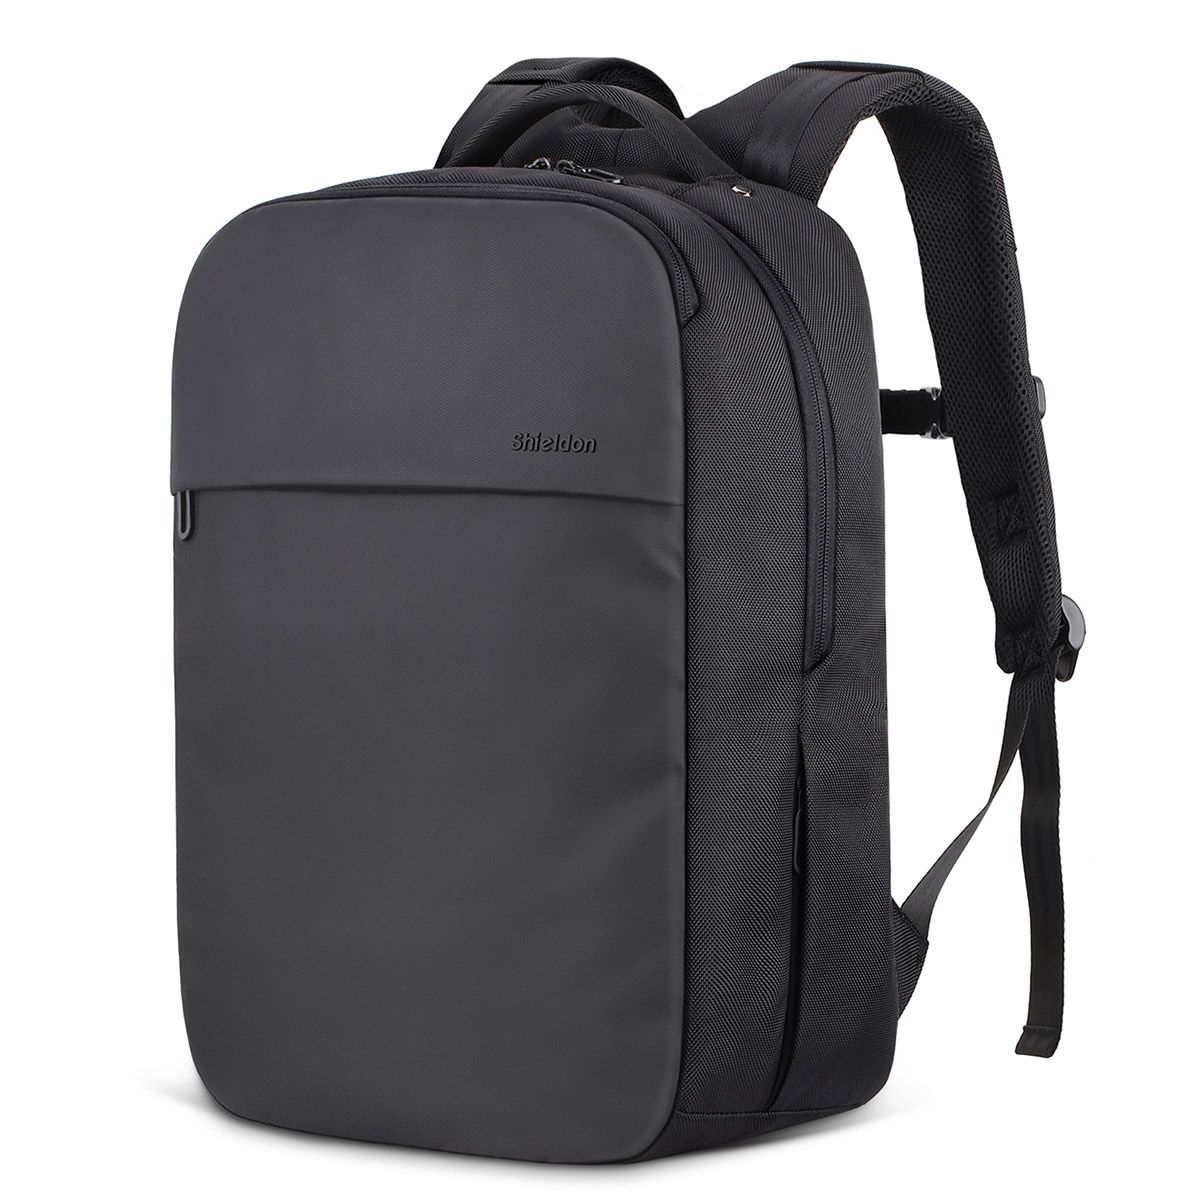 Anti-Theft Mens USB Charging Backpack Laptop Travel Business Notebook School Bag